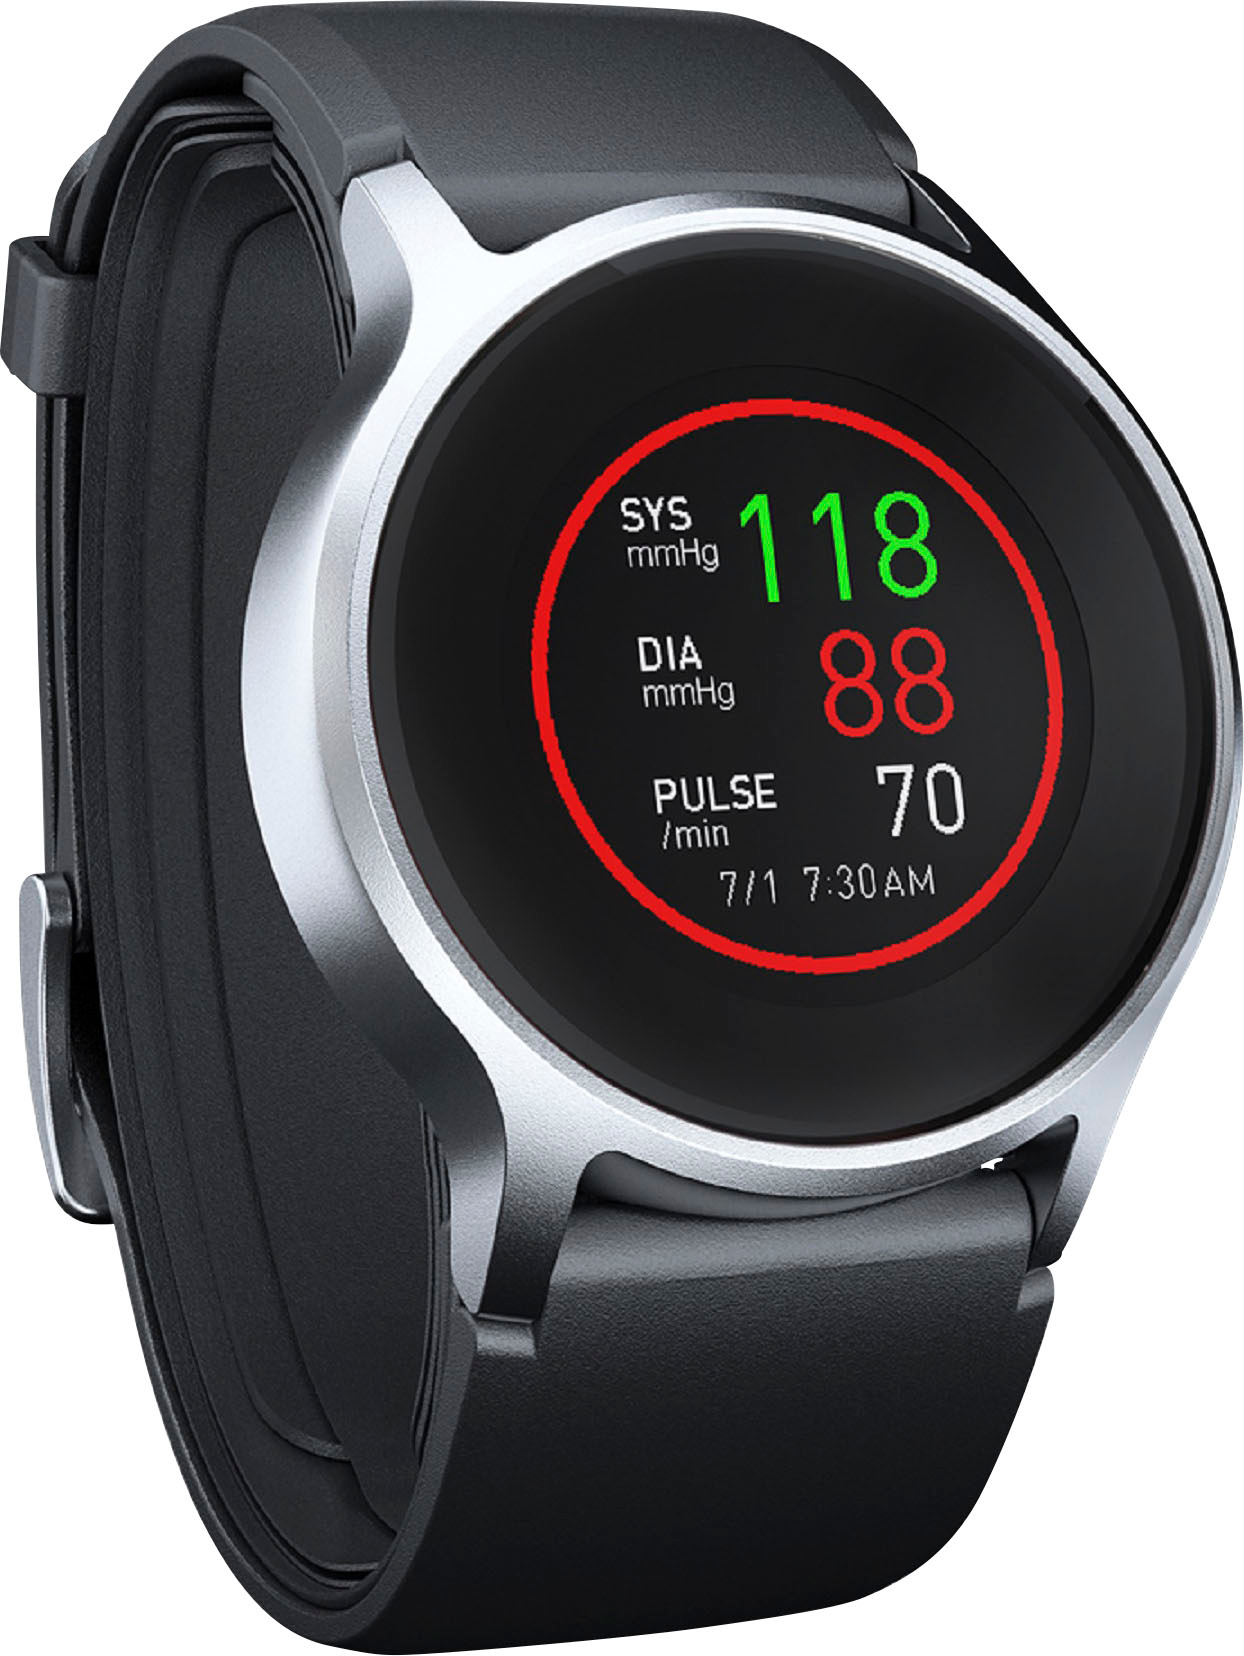 Angle View: Omron - HeartGuide, Wearable Blood Pressure Monitor Watch - Black